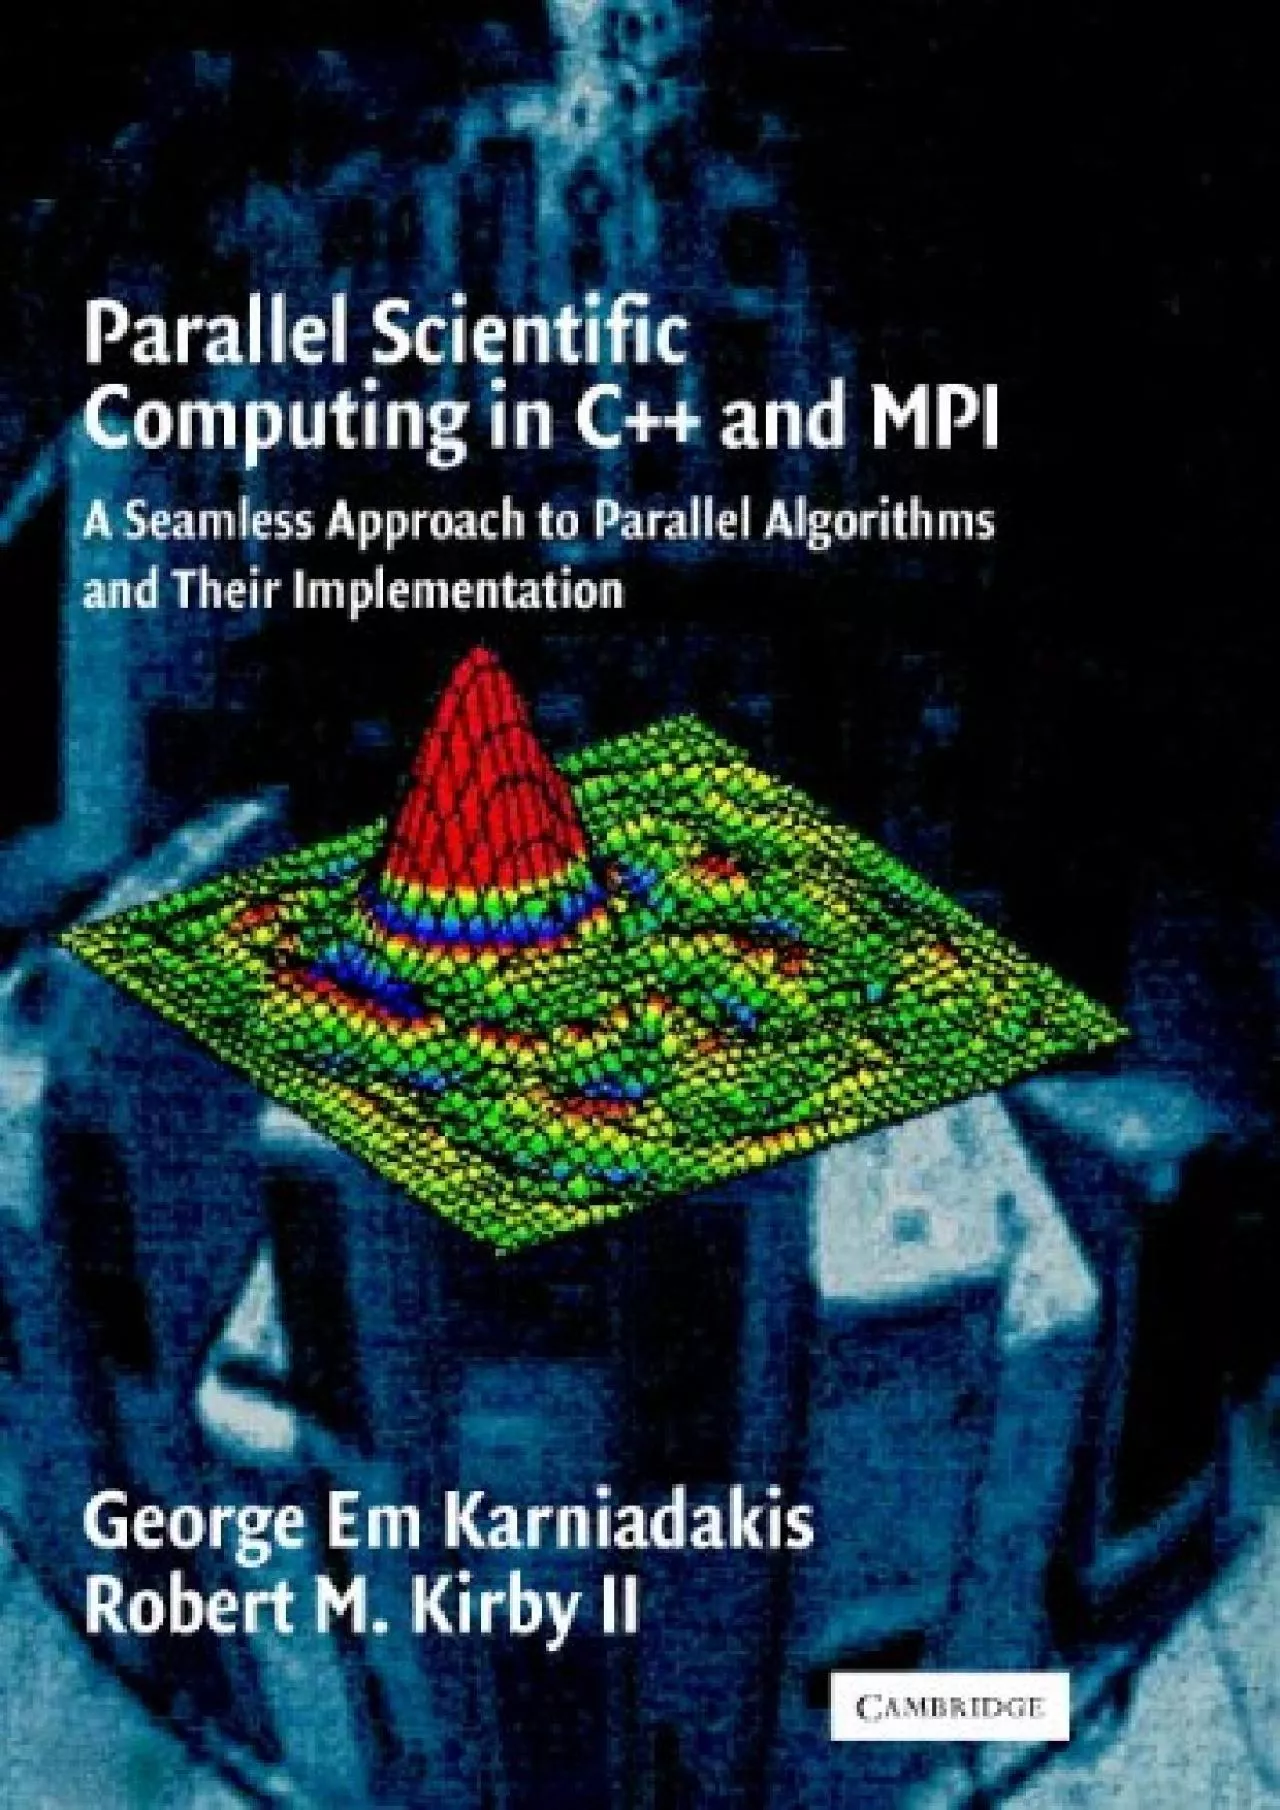 [BEST]-Parallel Scientific Computing in C++ and MPI: A Seamless Approach to Parallel Algorithms